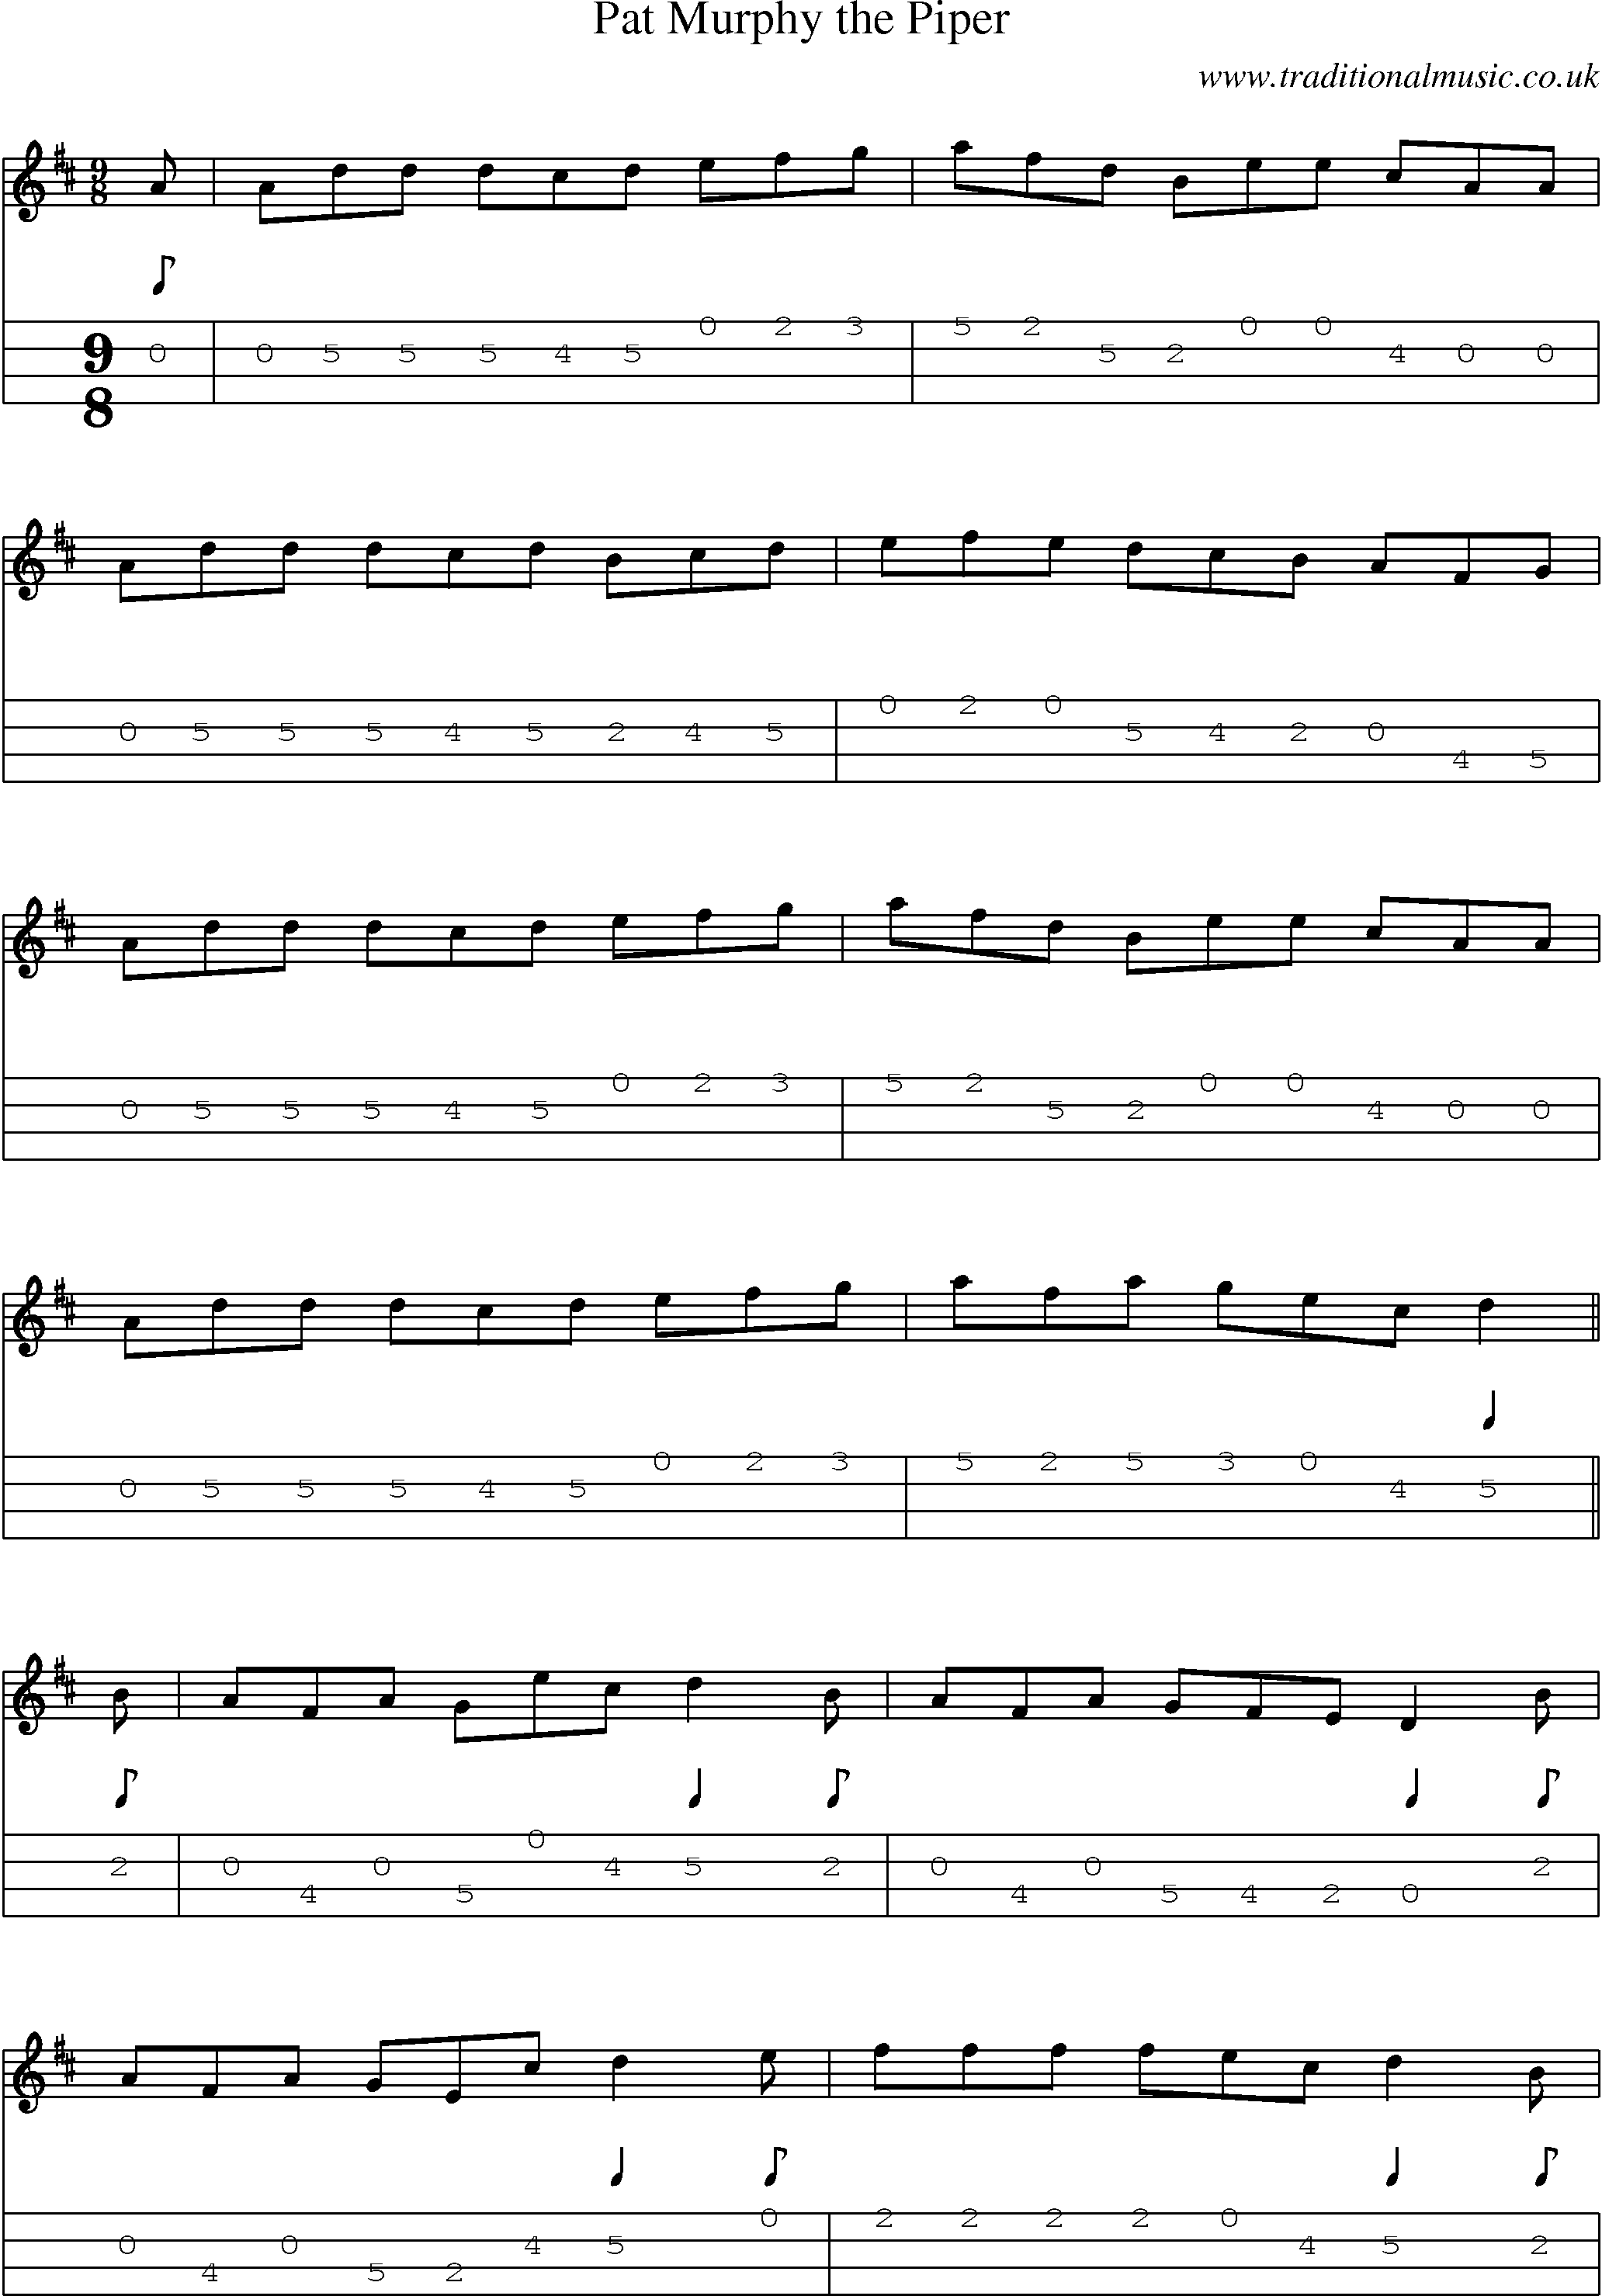 Music Score and Mandolin Tabs for Pat Murphy Piper